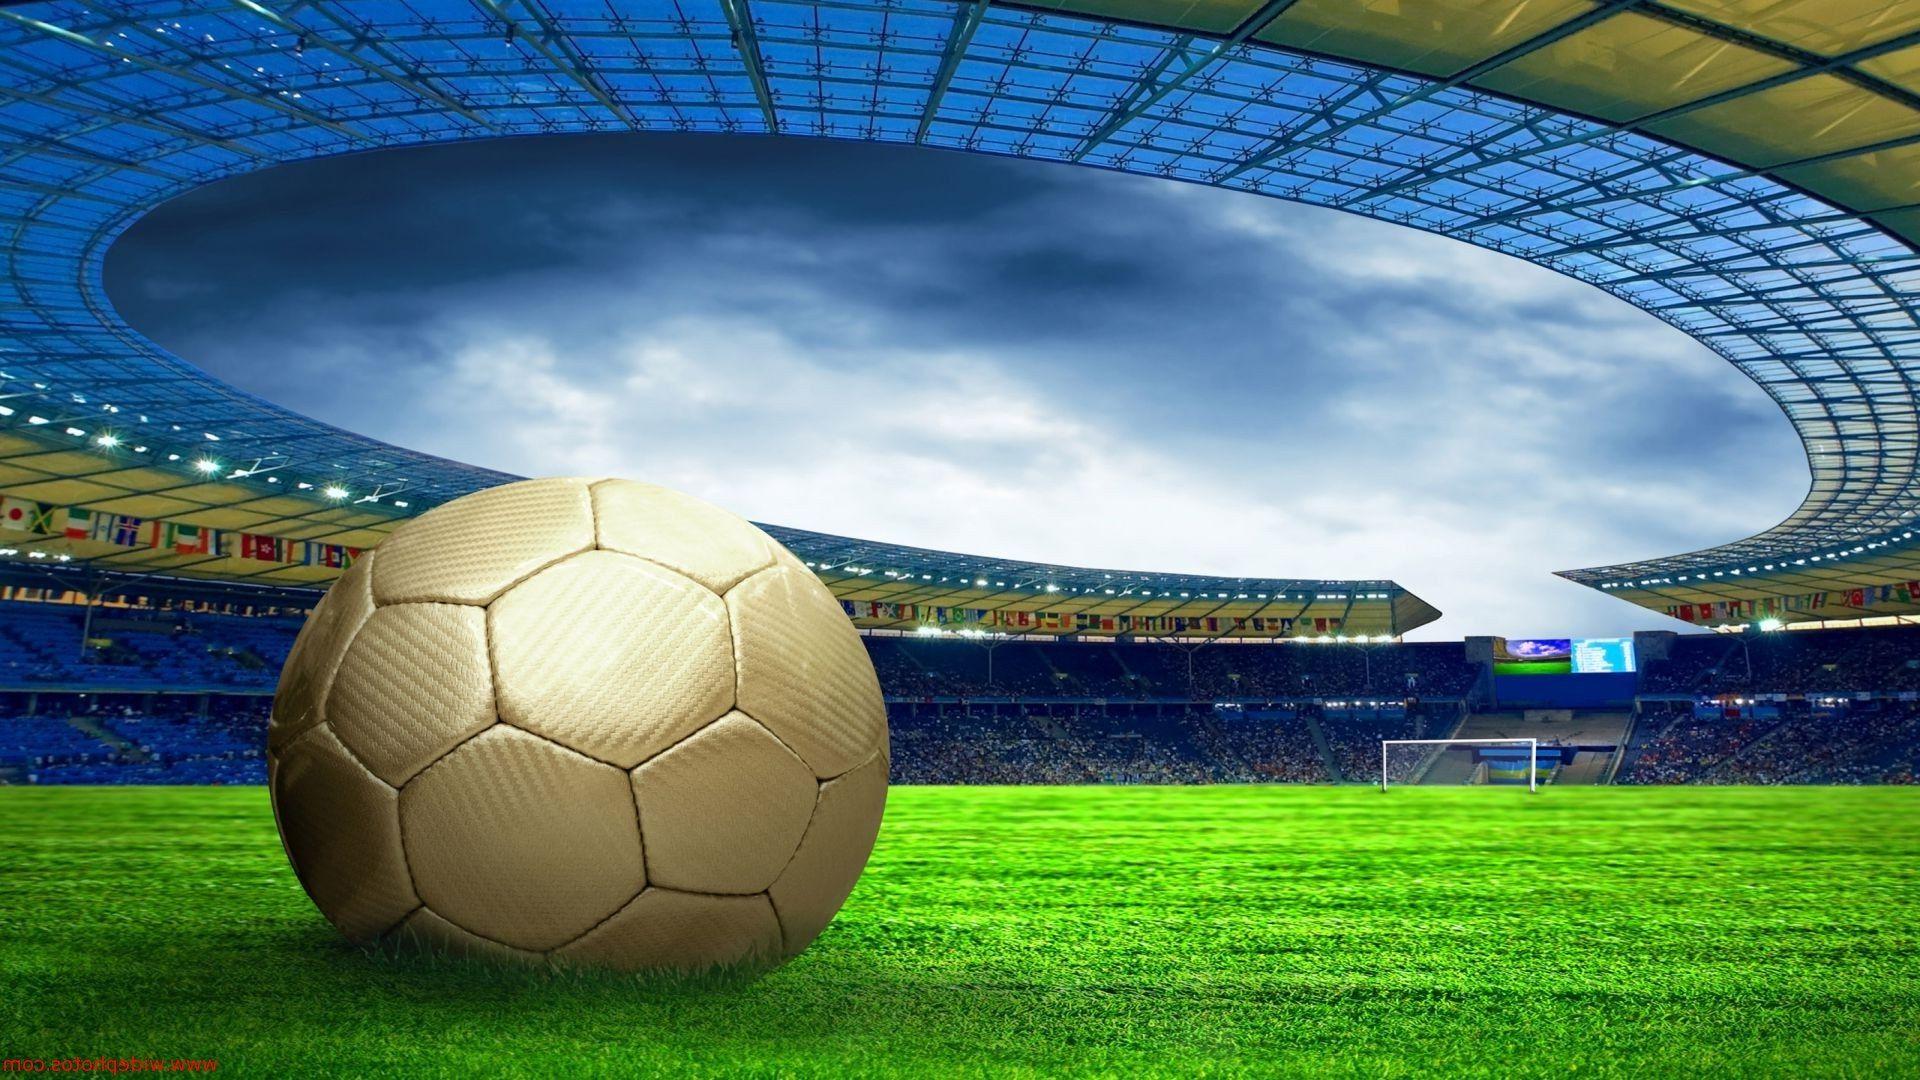 Free download Football Background